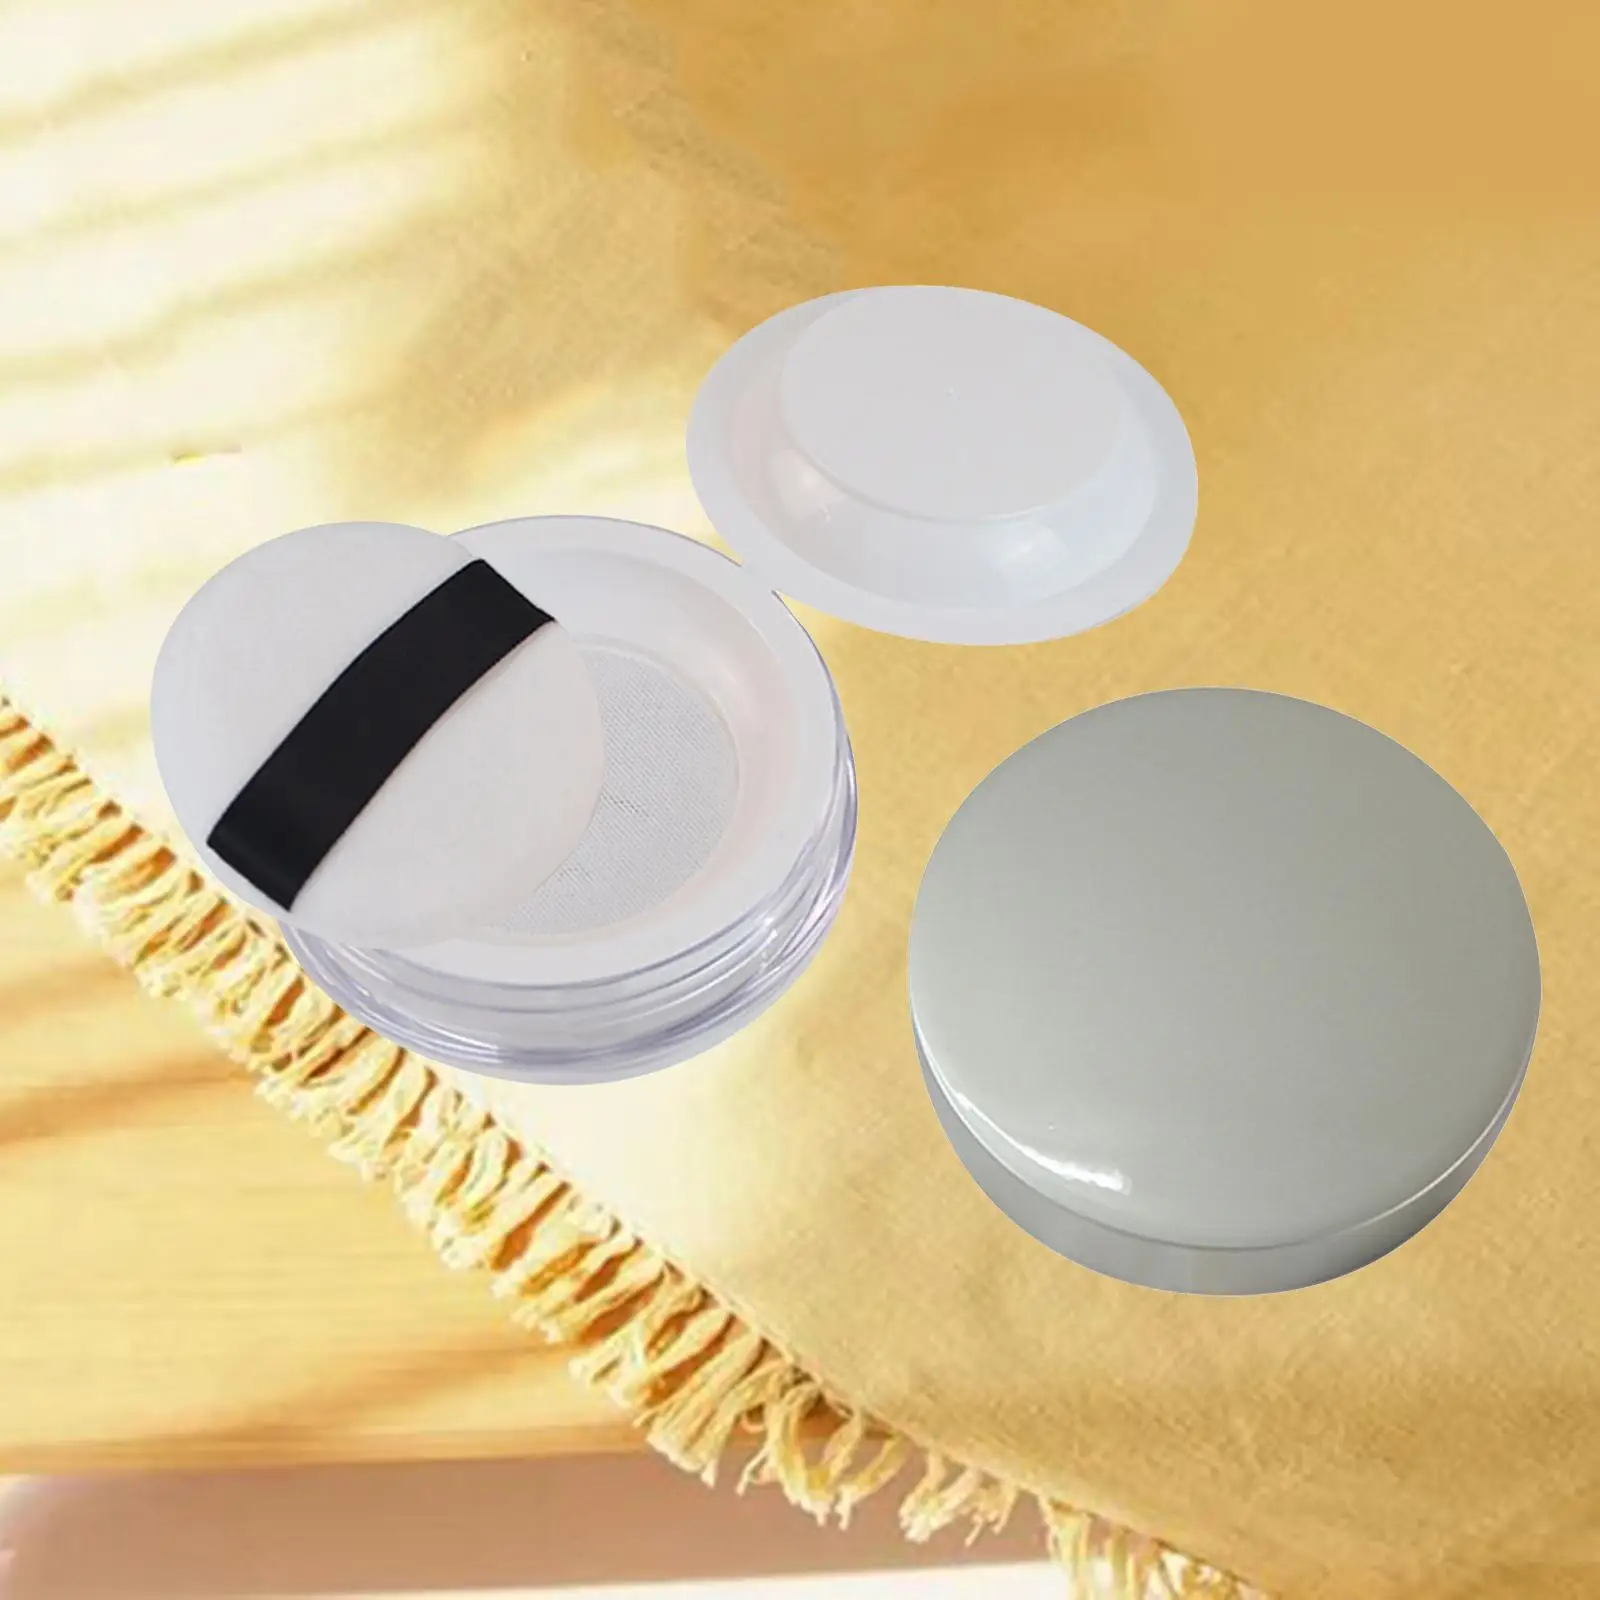 Refillable Empty Makeup Powder Container with Puff Sifter for Travel Blusher